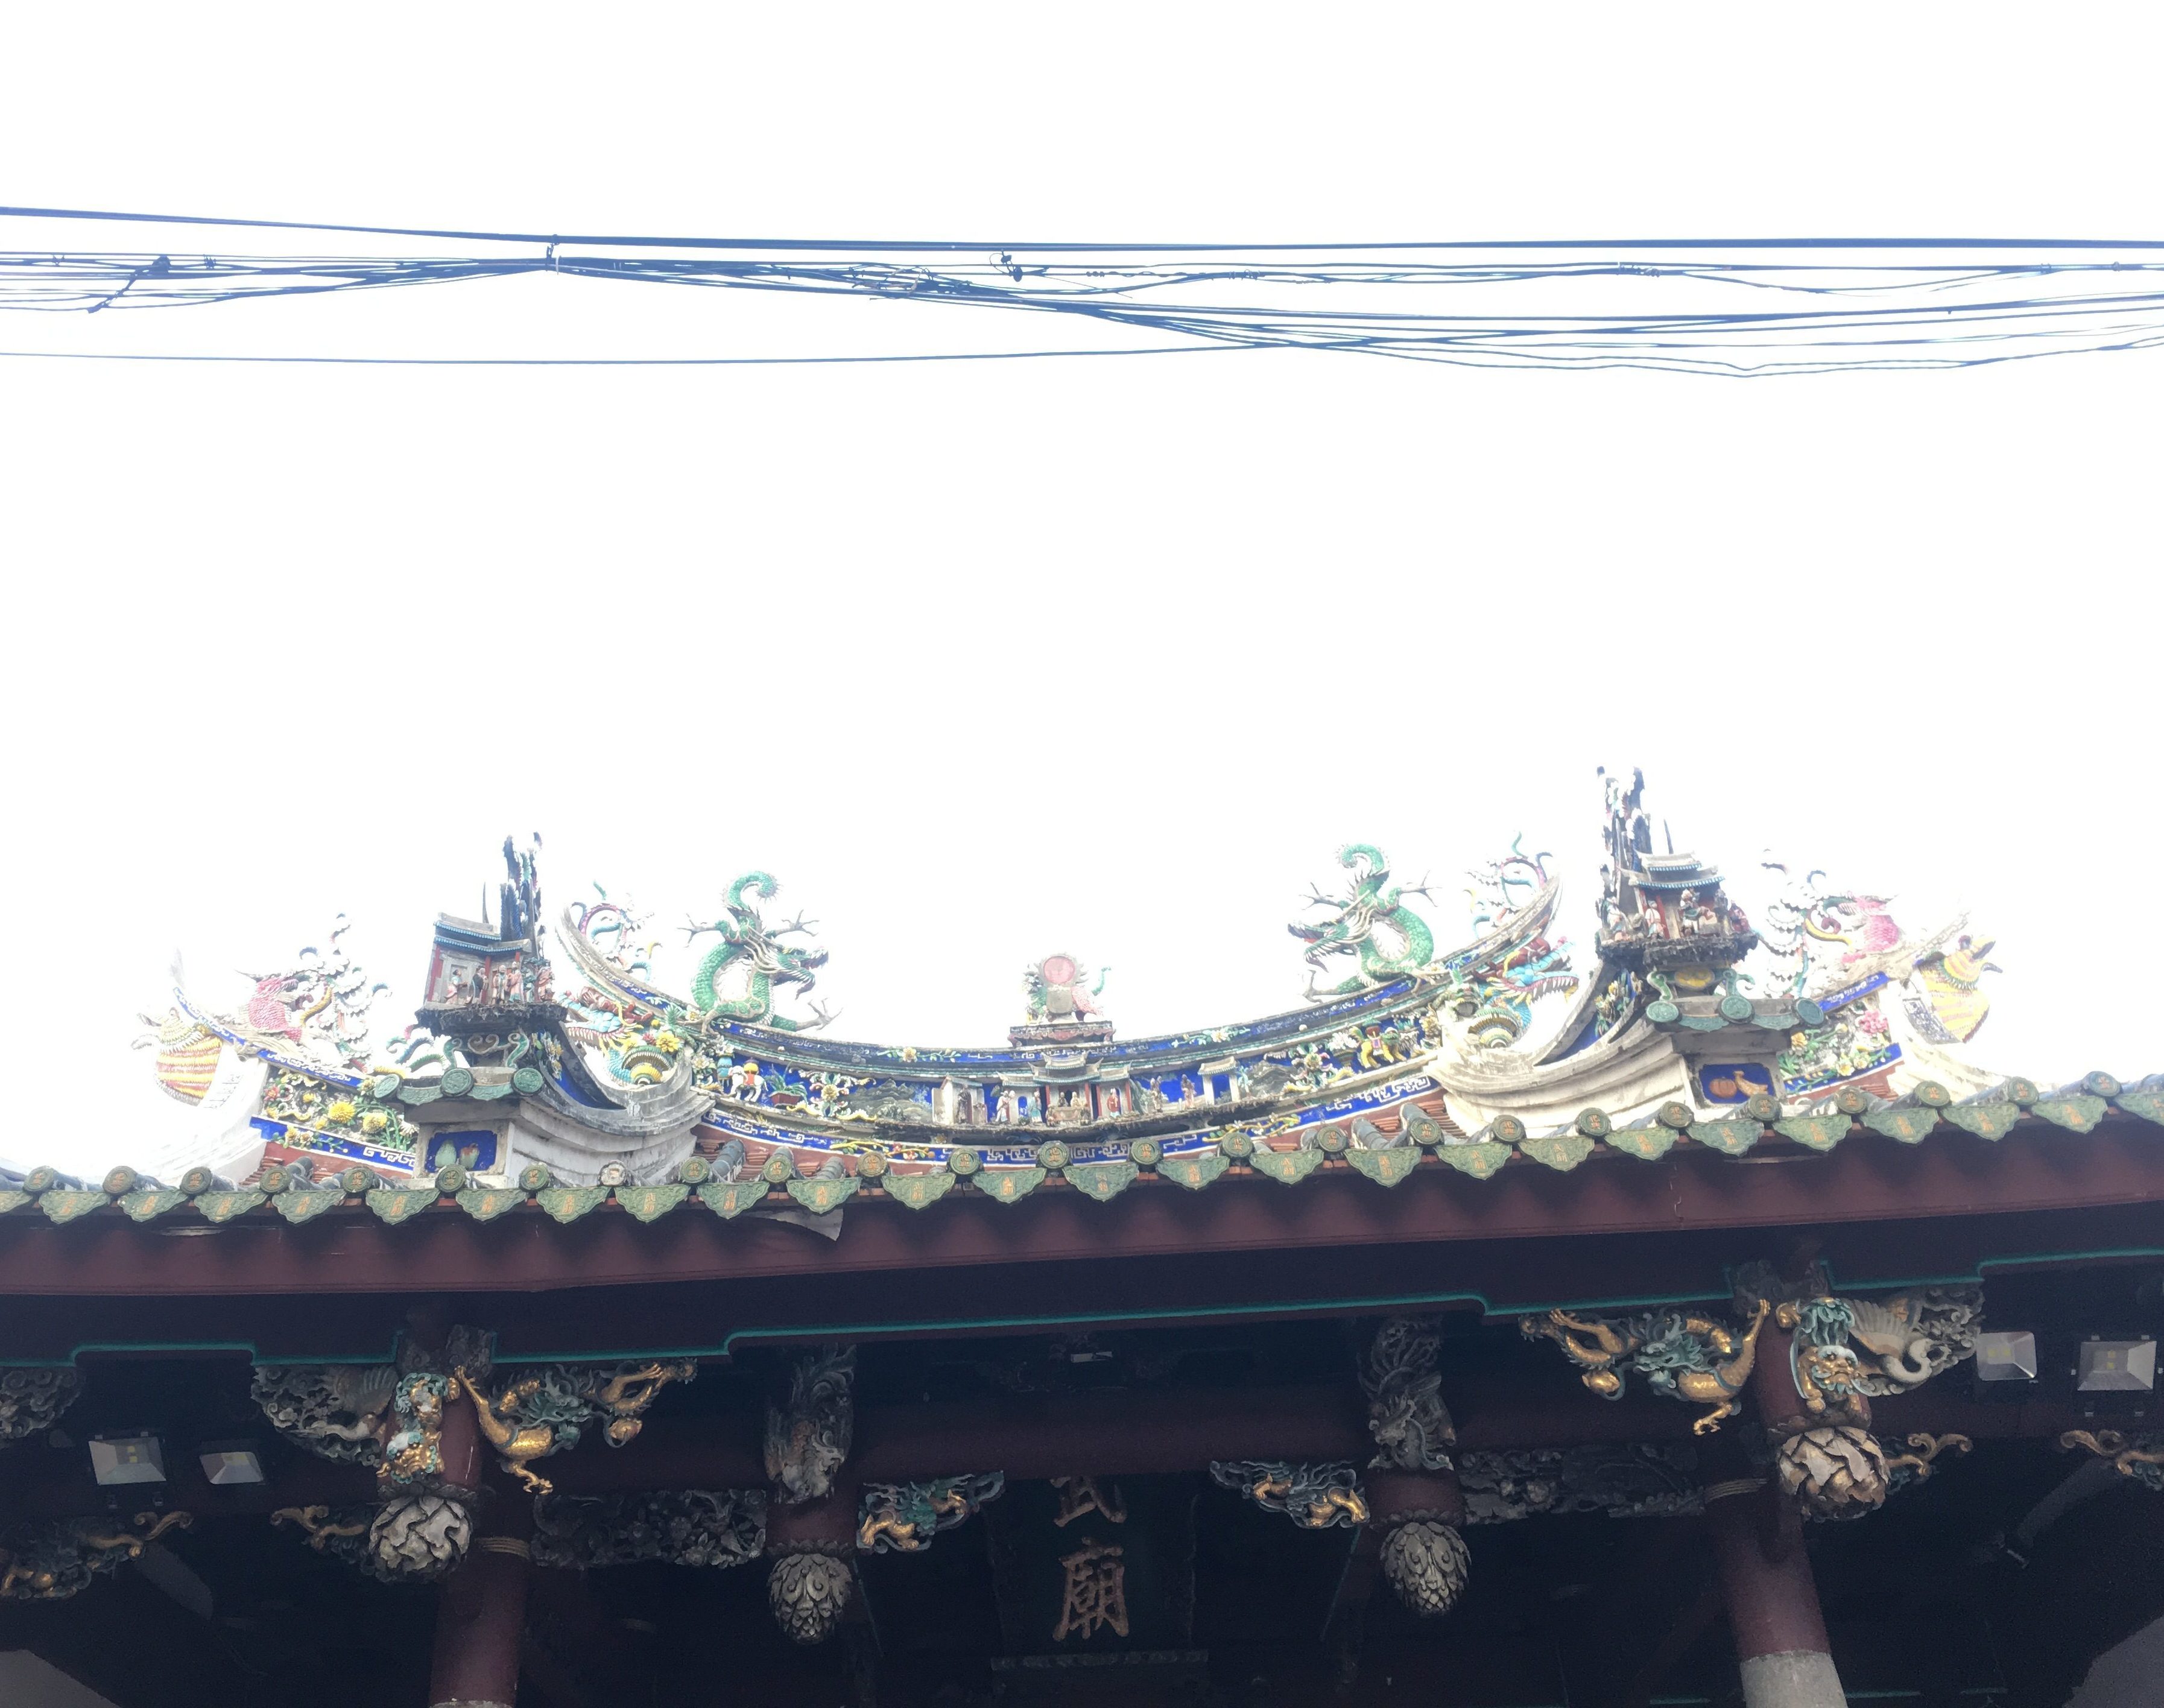 Dragons on the roof protecting the temple